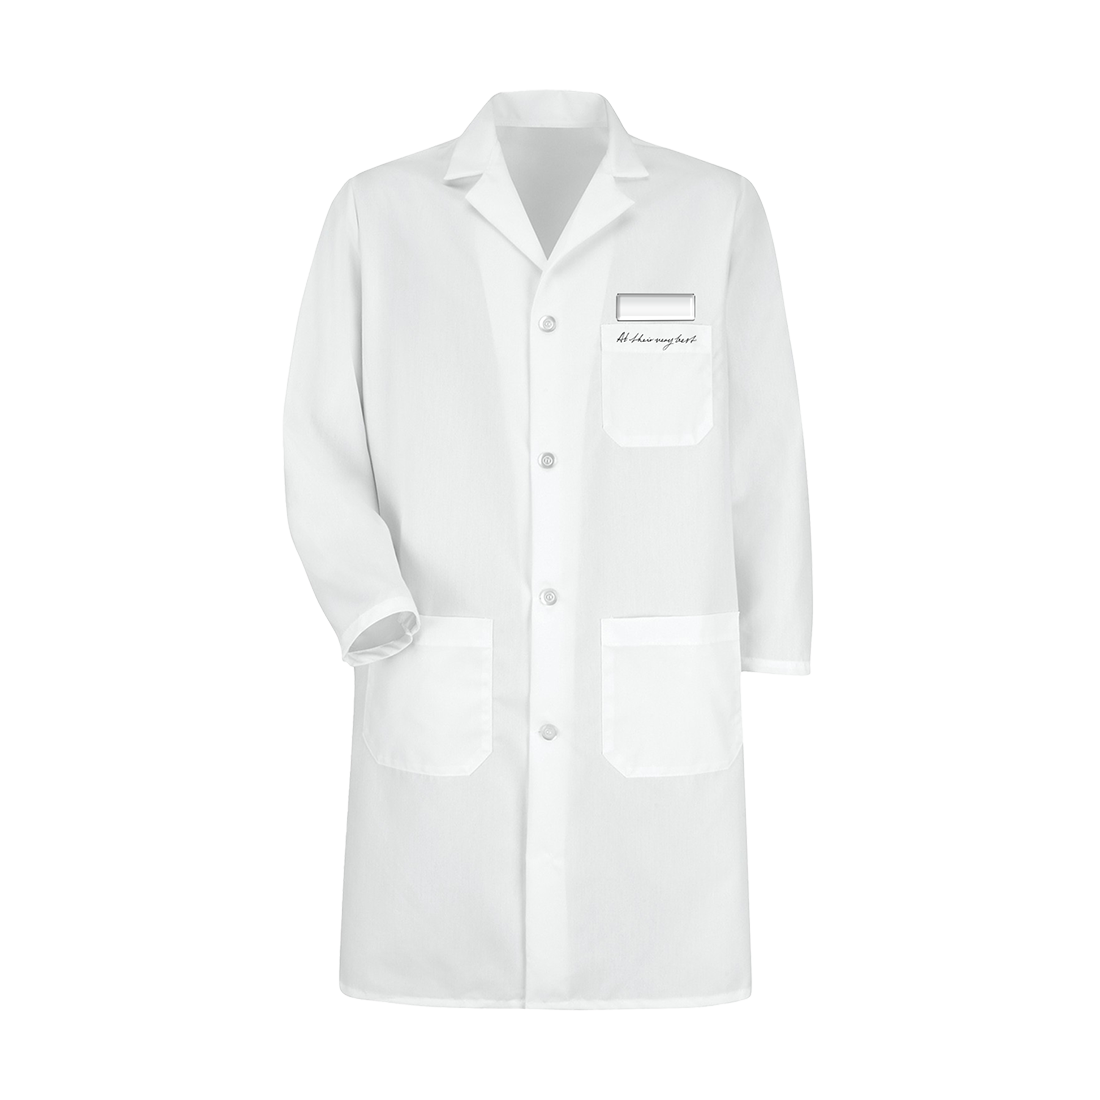 The 1975 - At Their Very Best Lab Coat